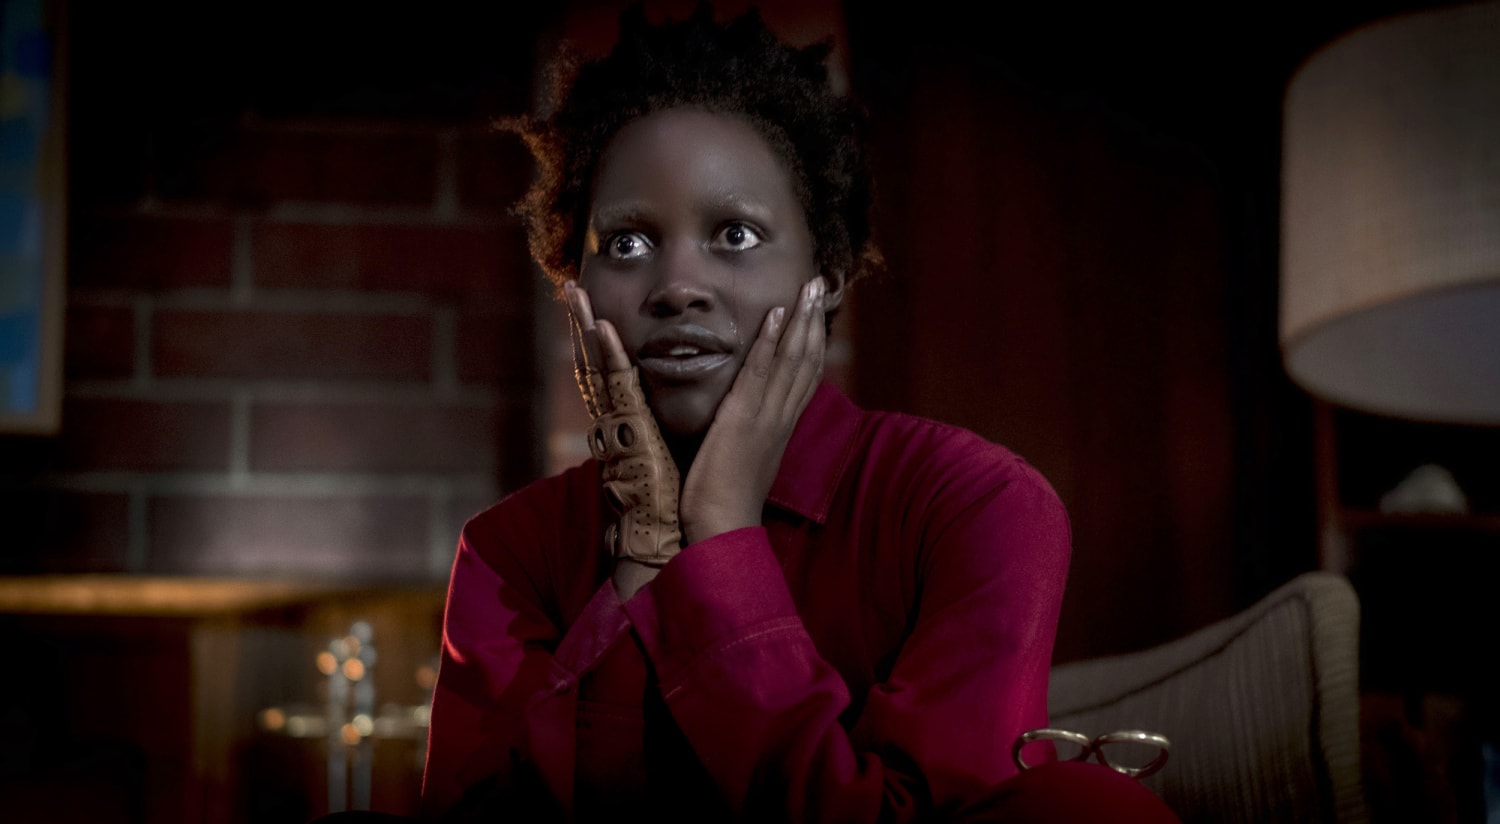 Jordan Peele S Us Is Everything Horror Fans Want A Movie To Be Disturbing Beautiful And Impossible To Forget